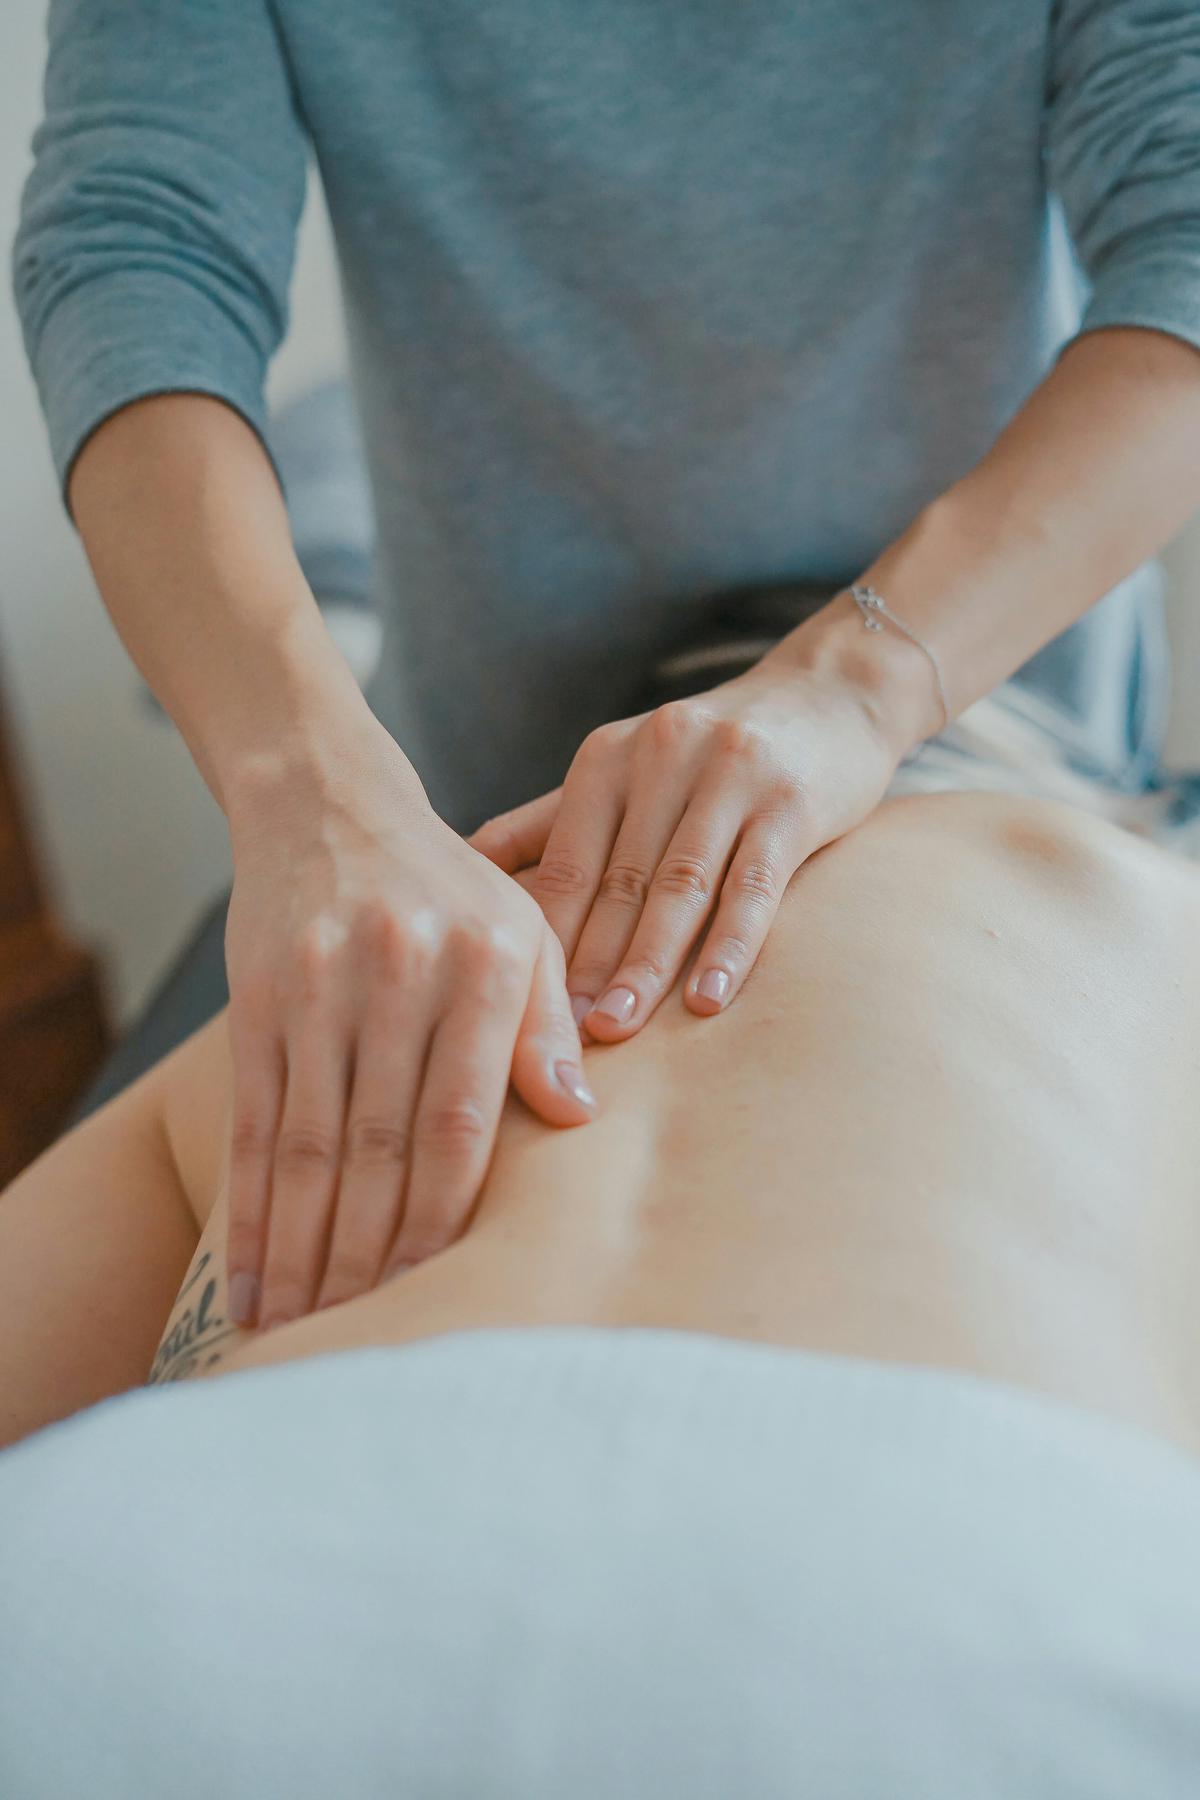 Image depicting a person receiving chiropractic care, showcasing the holistic nature of the practice